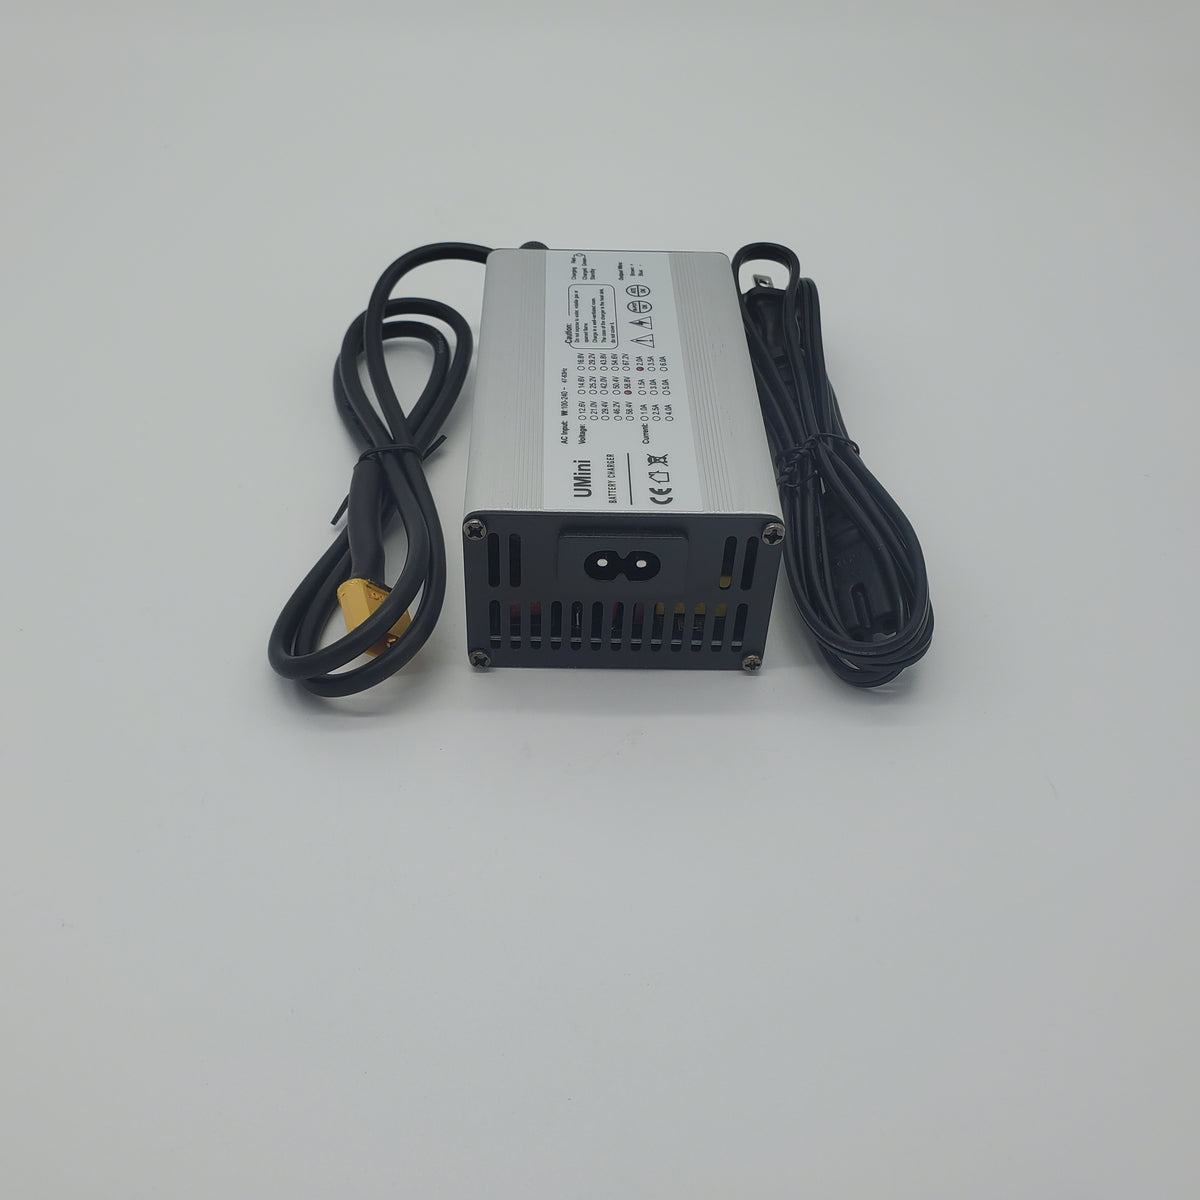 52v 2a UMini Charger w/ XT60 Connector